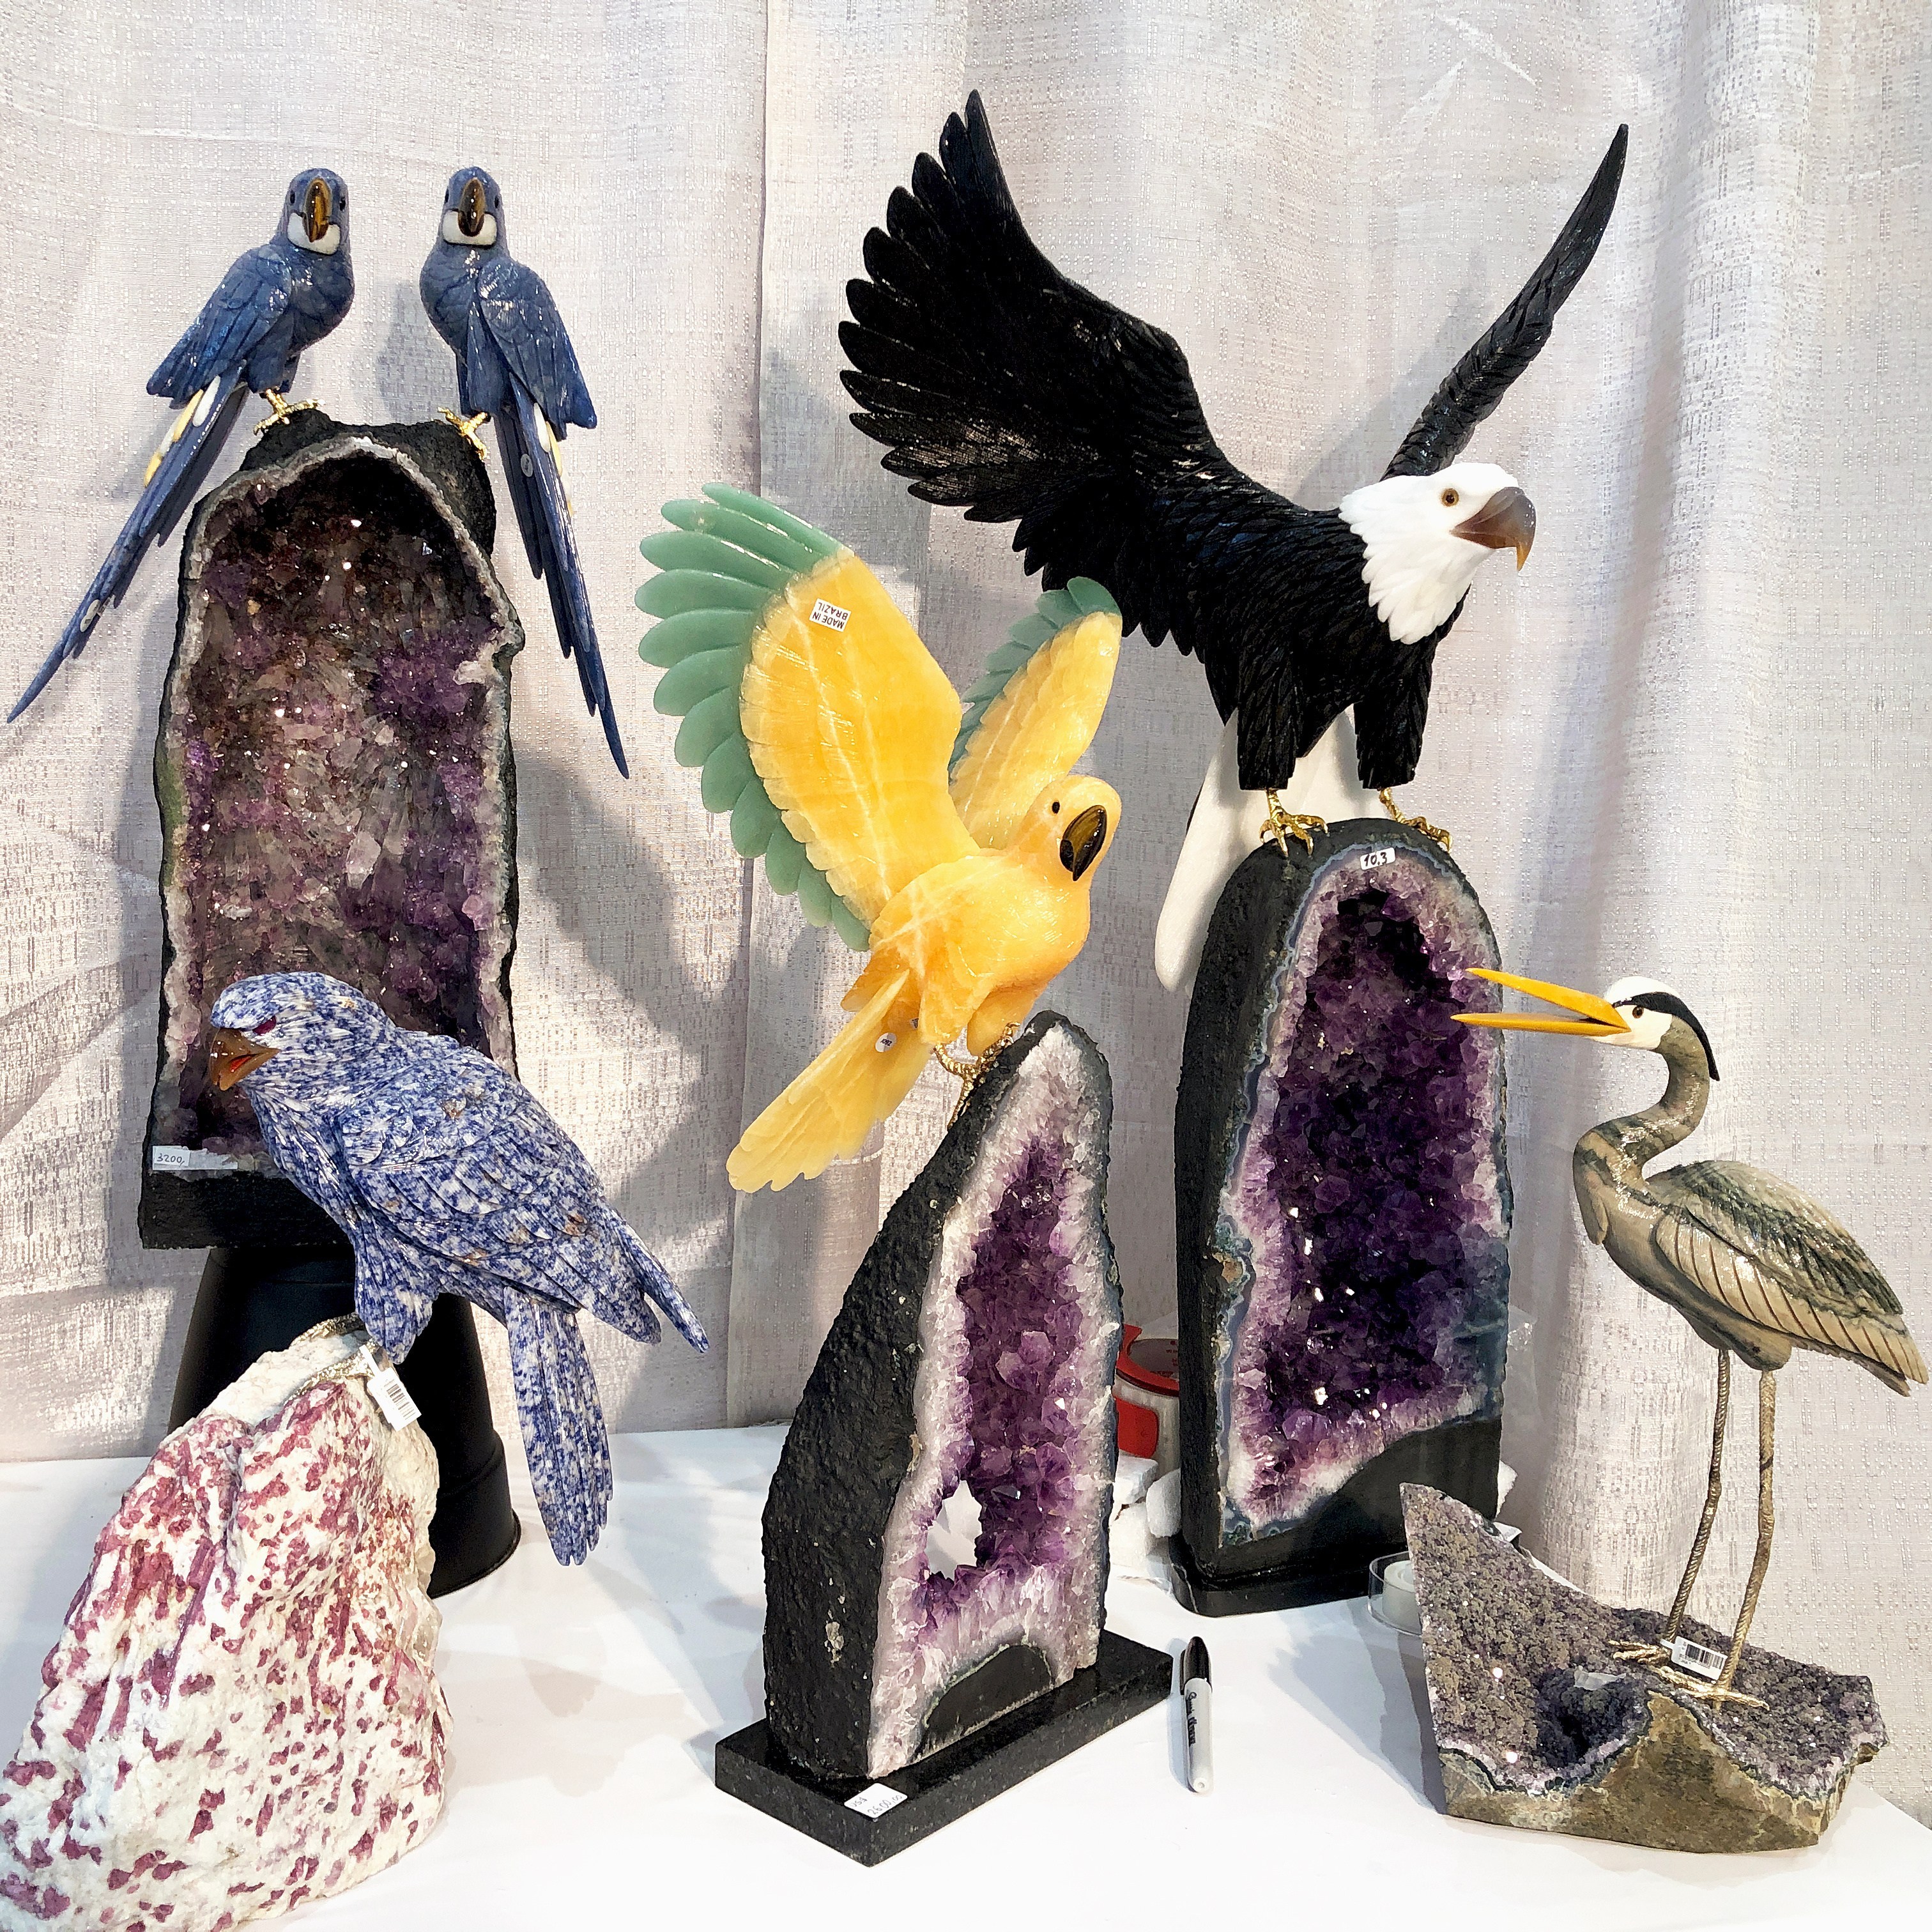 Incredible carved gemstone bird statues from BB Gems, some with amethyst geodes! Spotted at the 2019 AGTA GemFair.